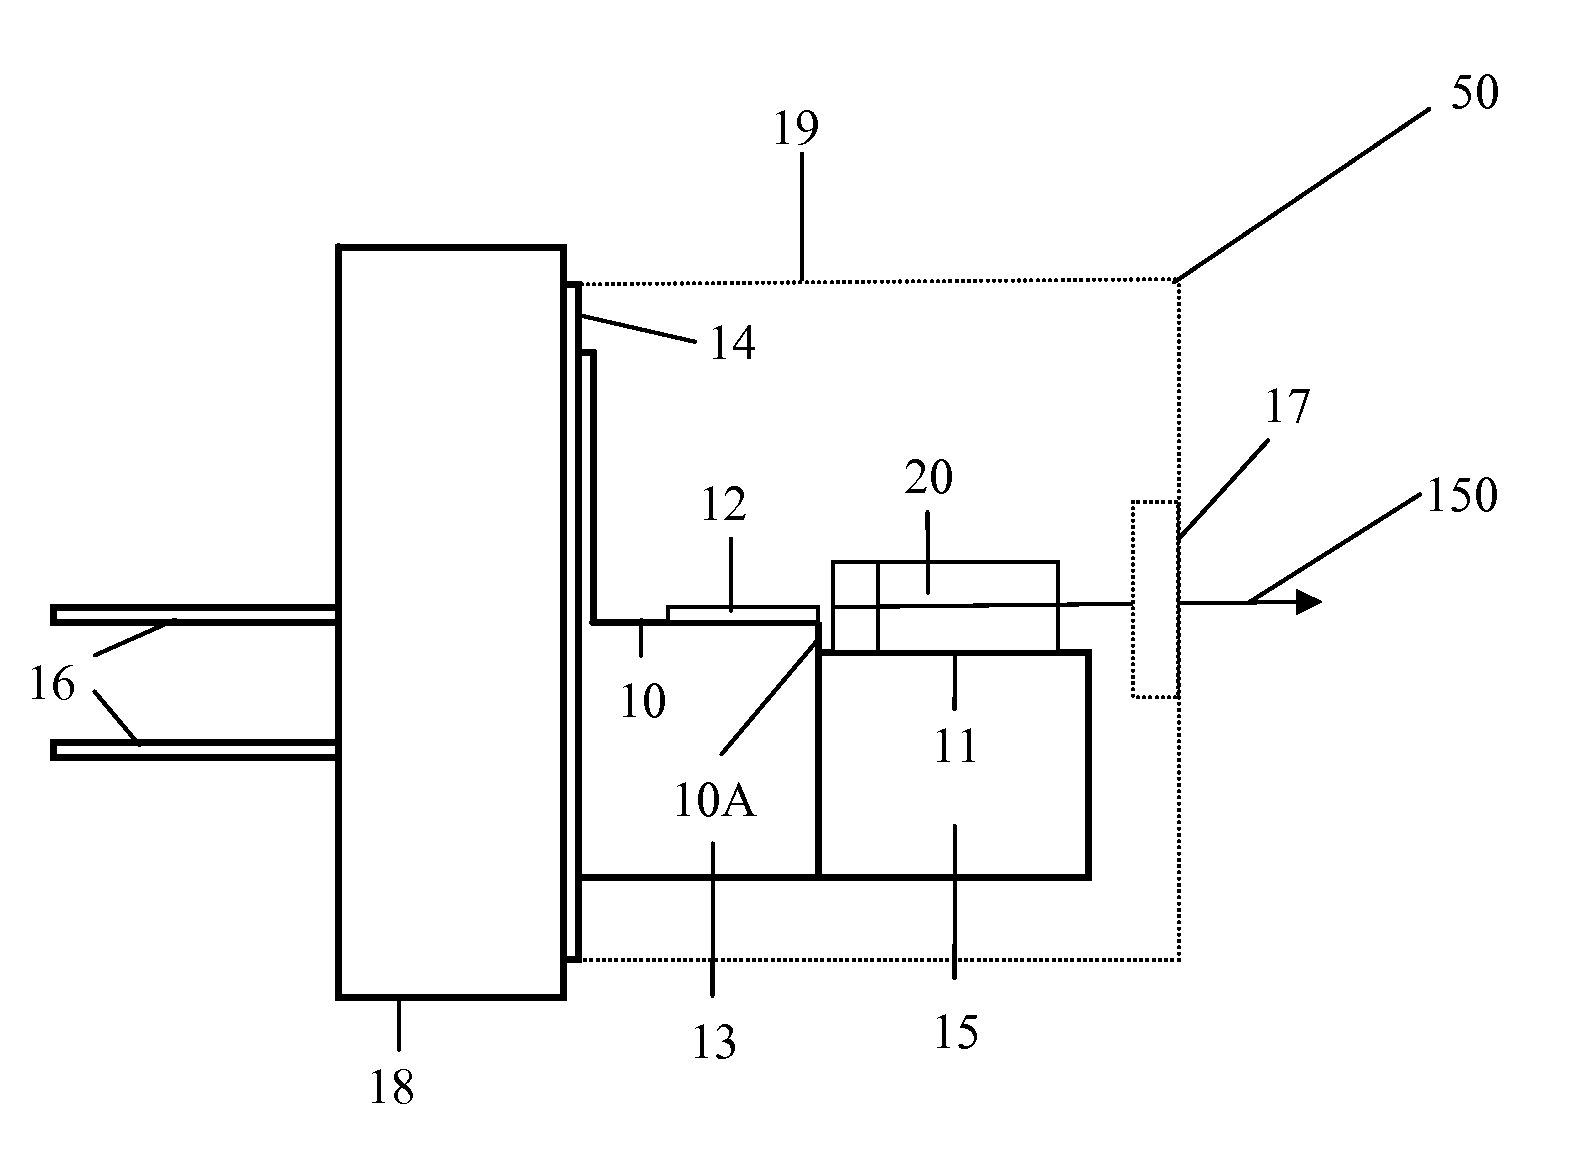 Methods for Producing Diode-Pumped Micro Lasers